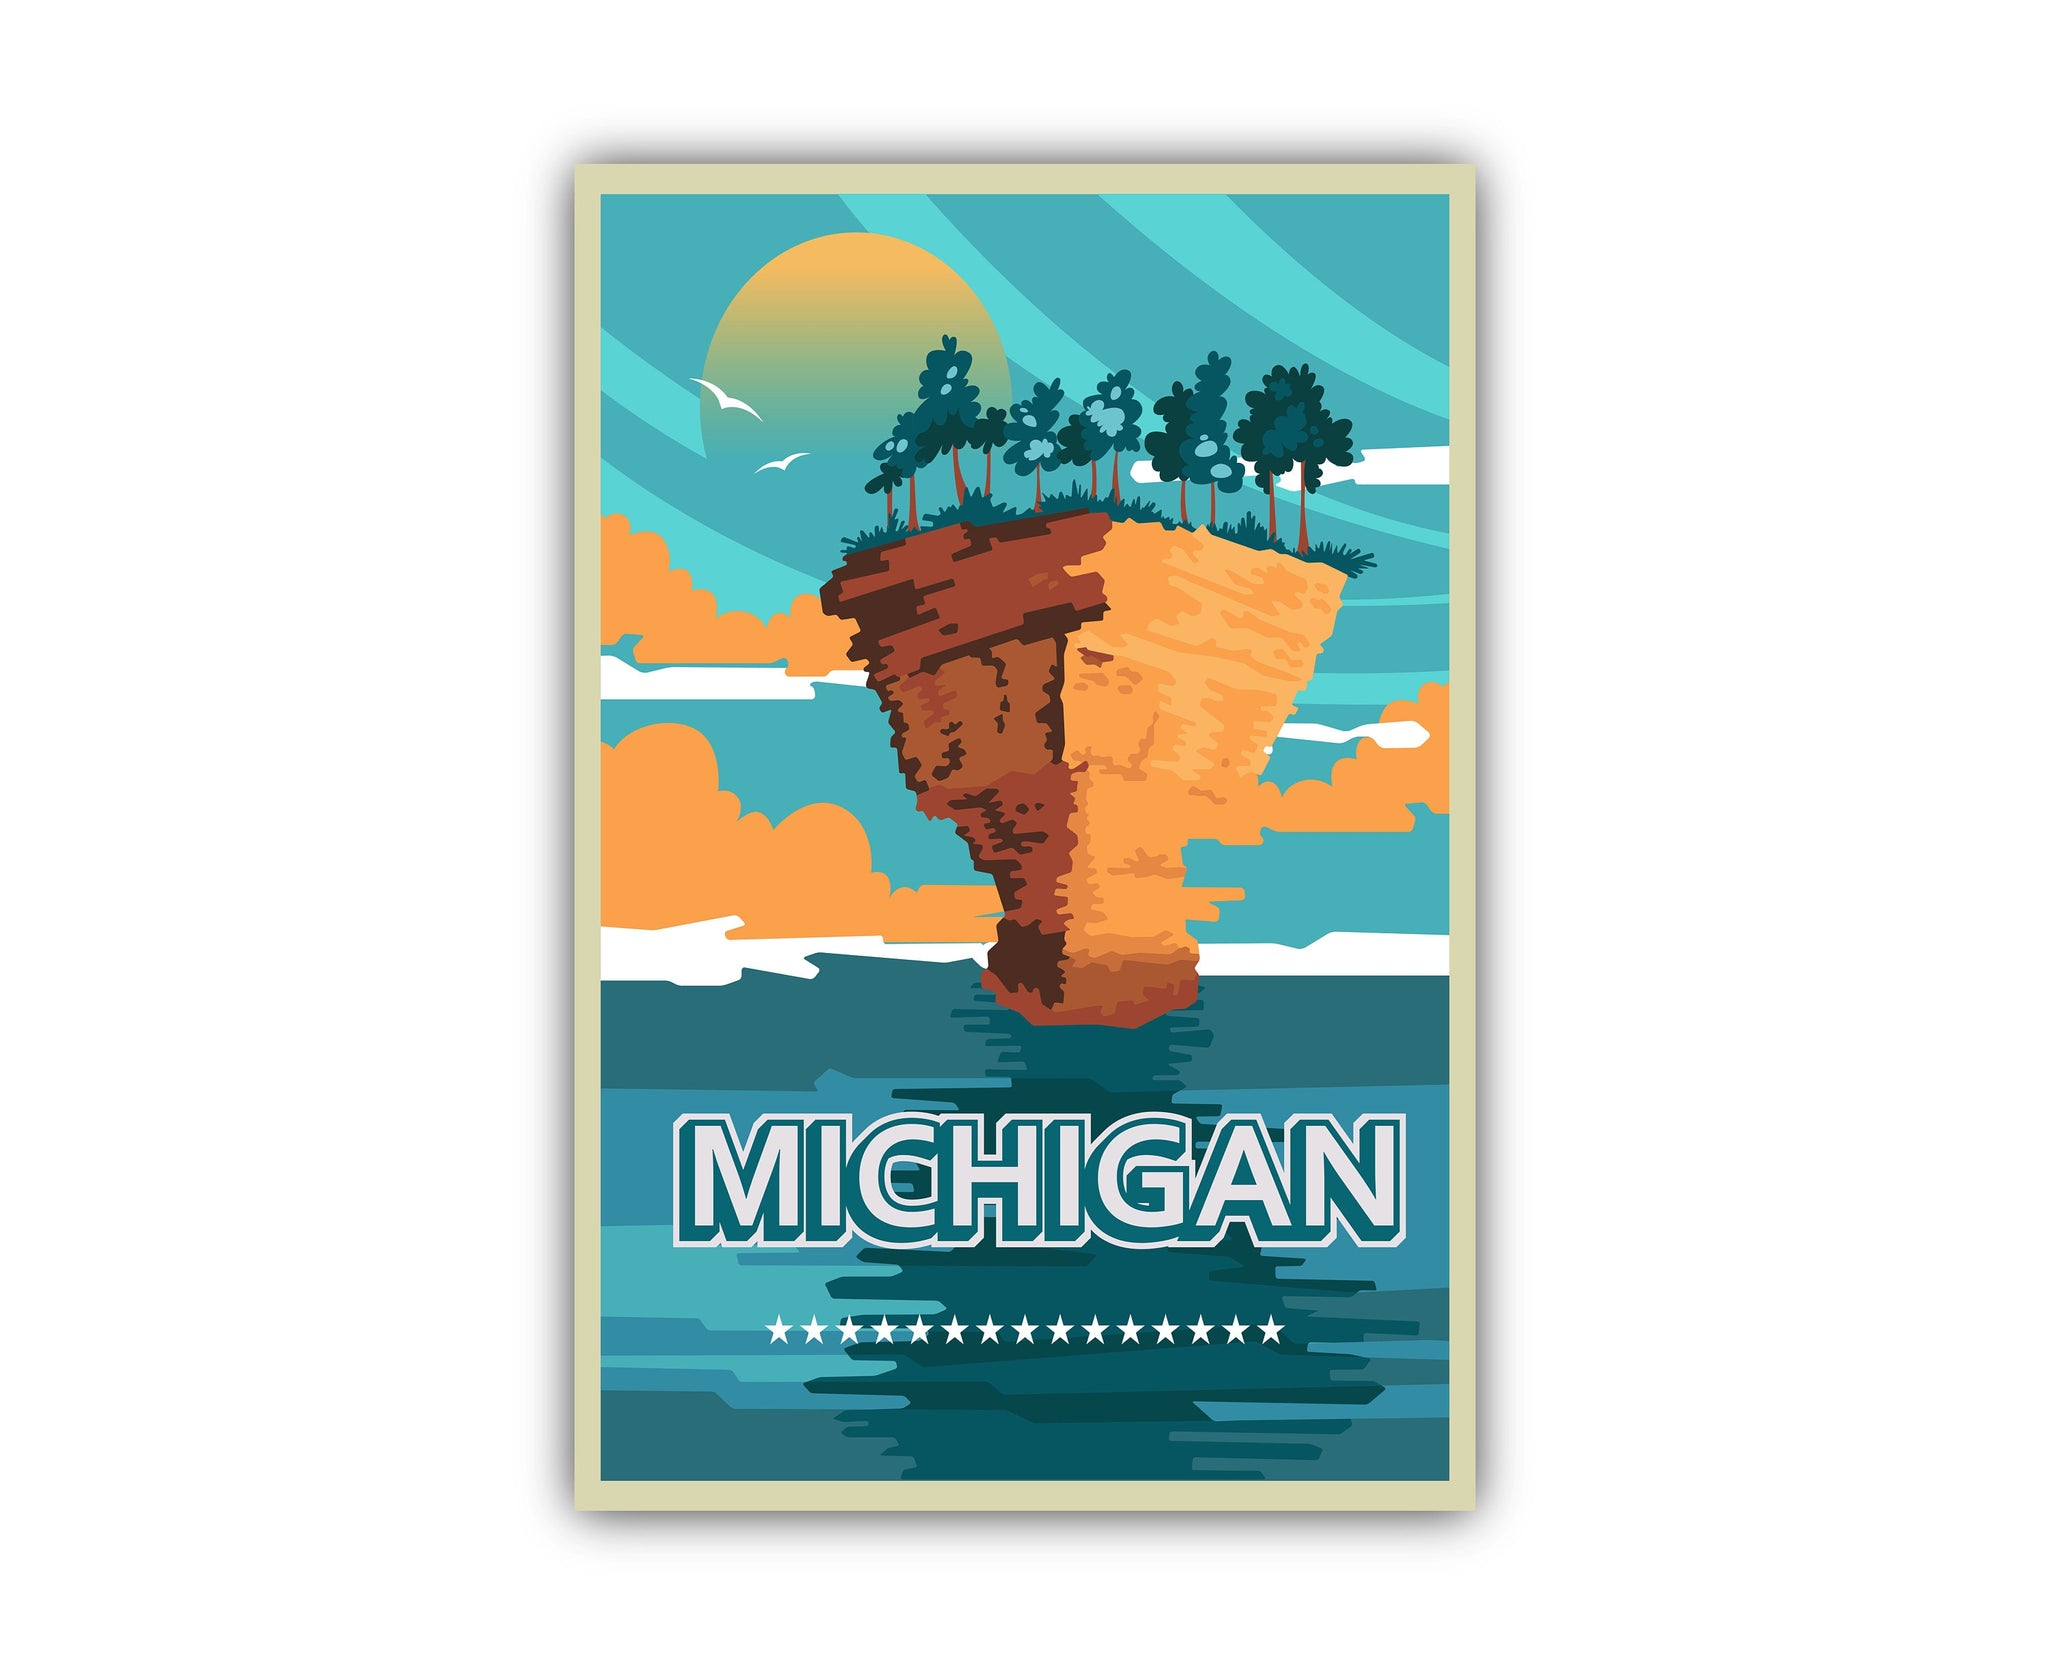 Retro Style Travel Poster, Michigan Vintage Rustic Poster Print, Home Wall Art, Office Wall Decoration, Posters, Michigan, State Map Poster